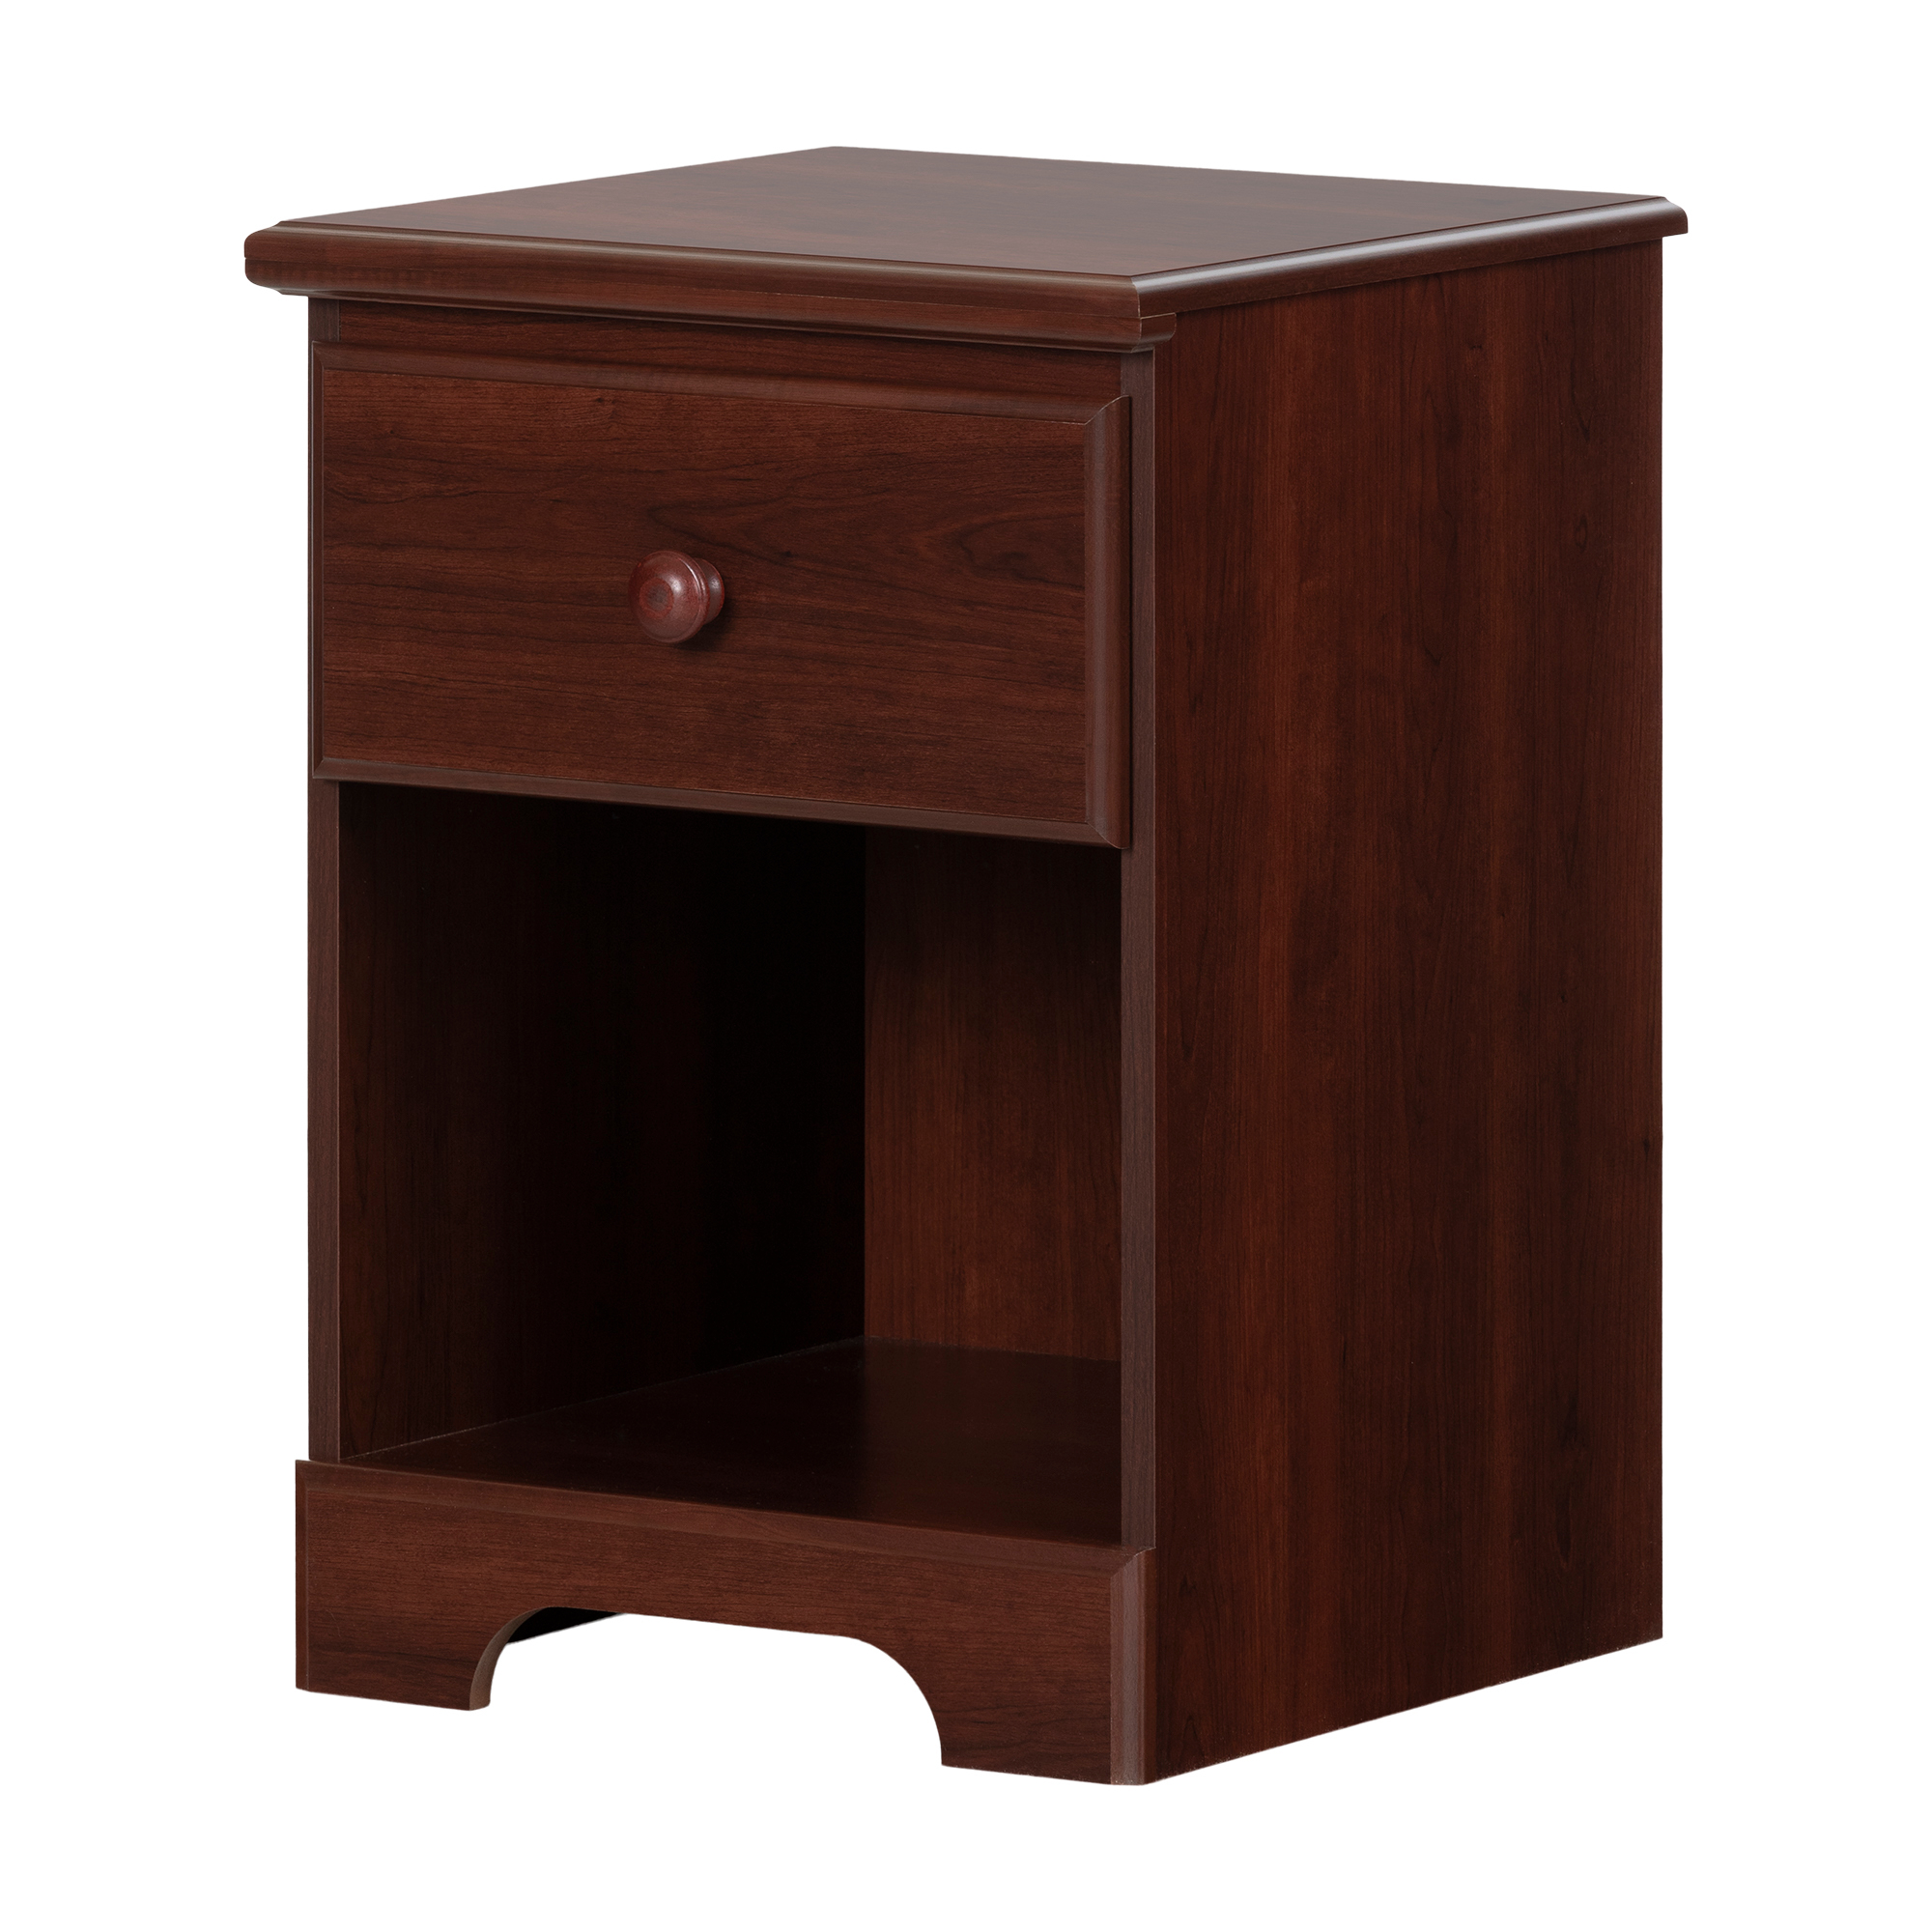 South Shore Summer Breeze Coastal 1-Drawer Nightstand with Storage, Cherry - image 1 of 10